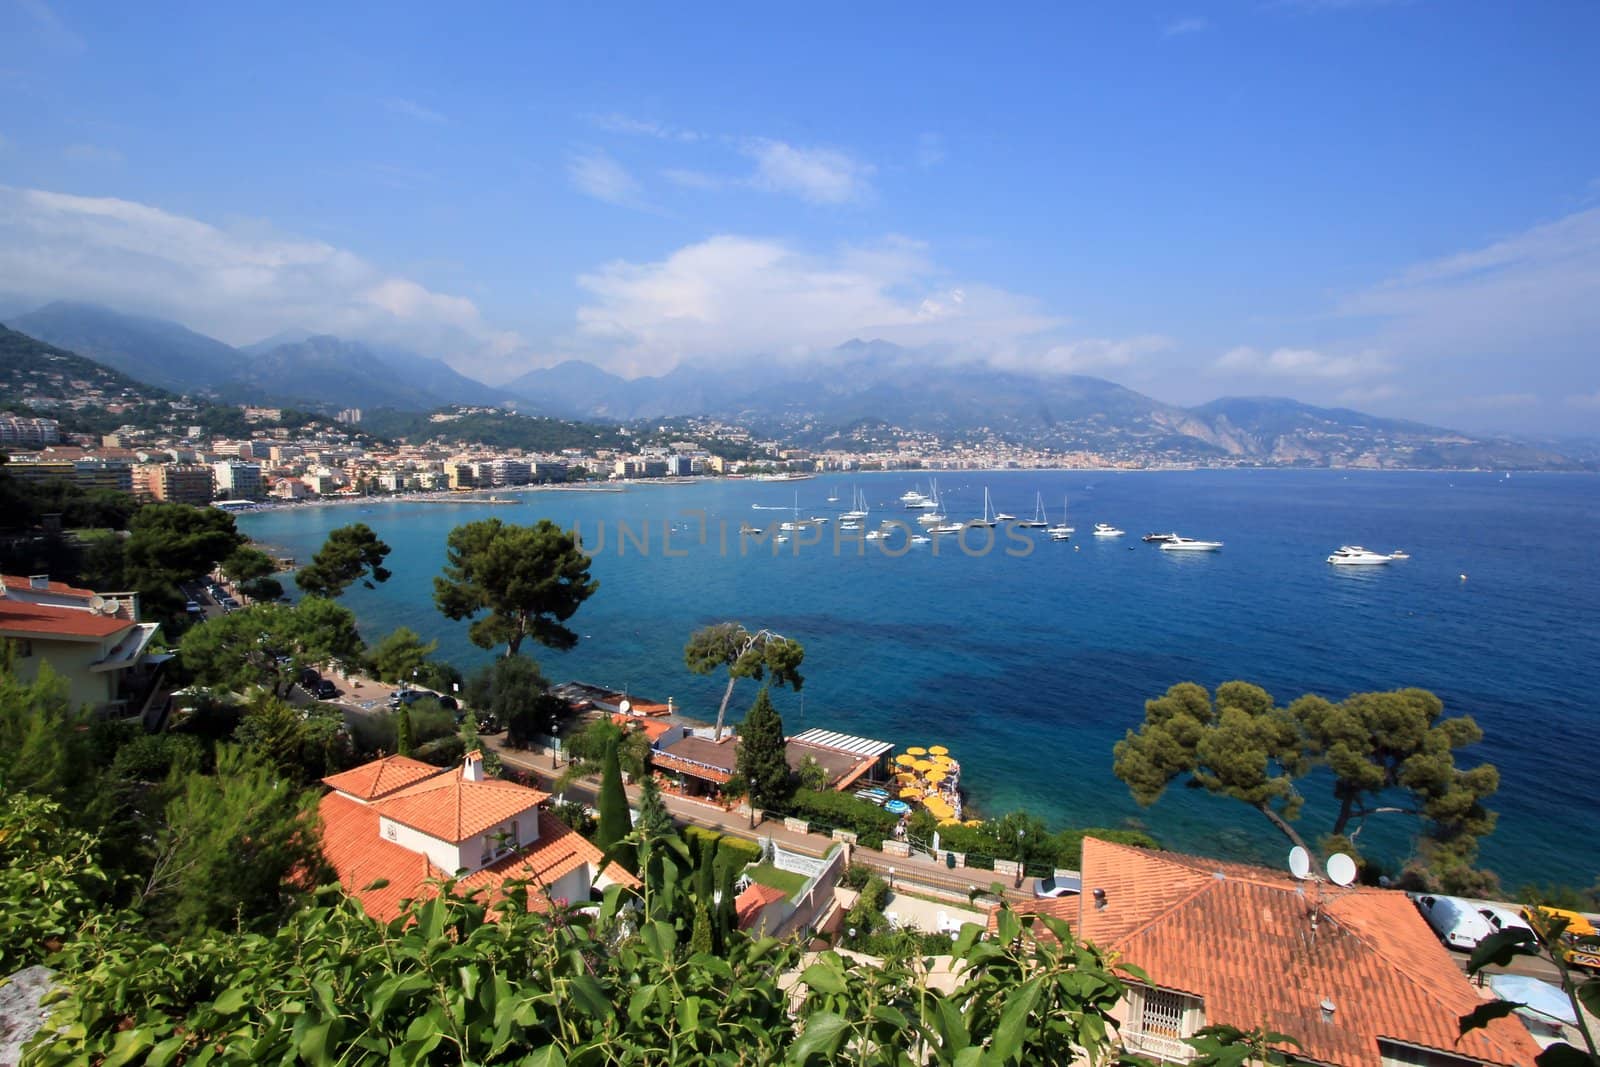 View of Menton, France by Elenaphotos21